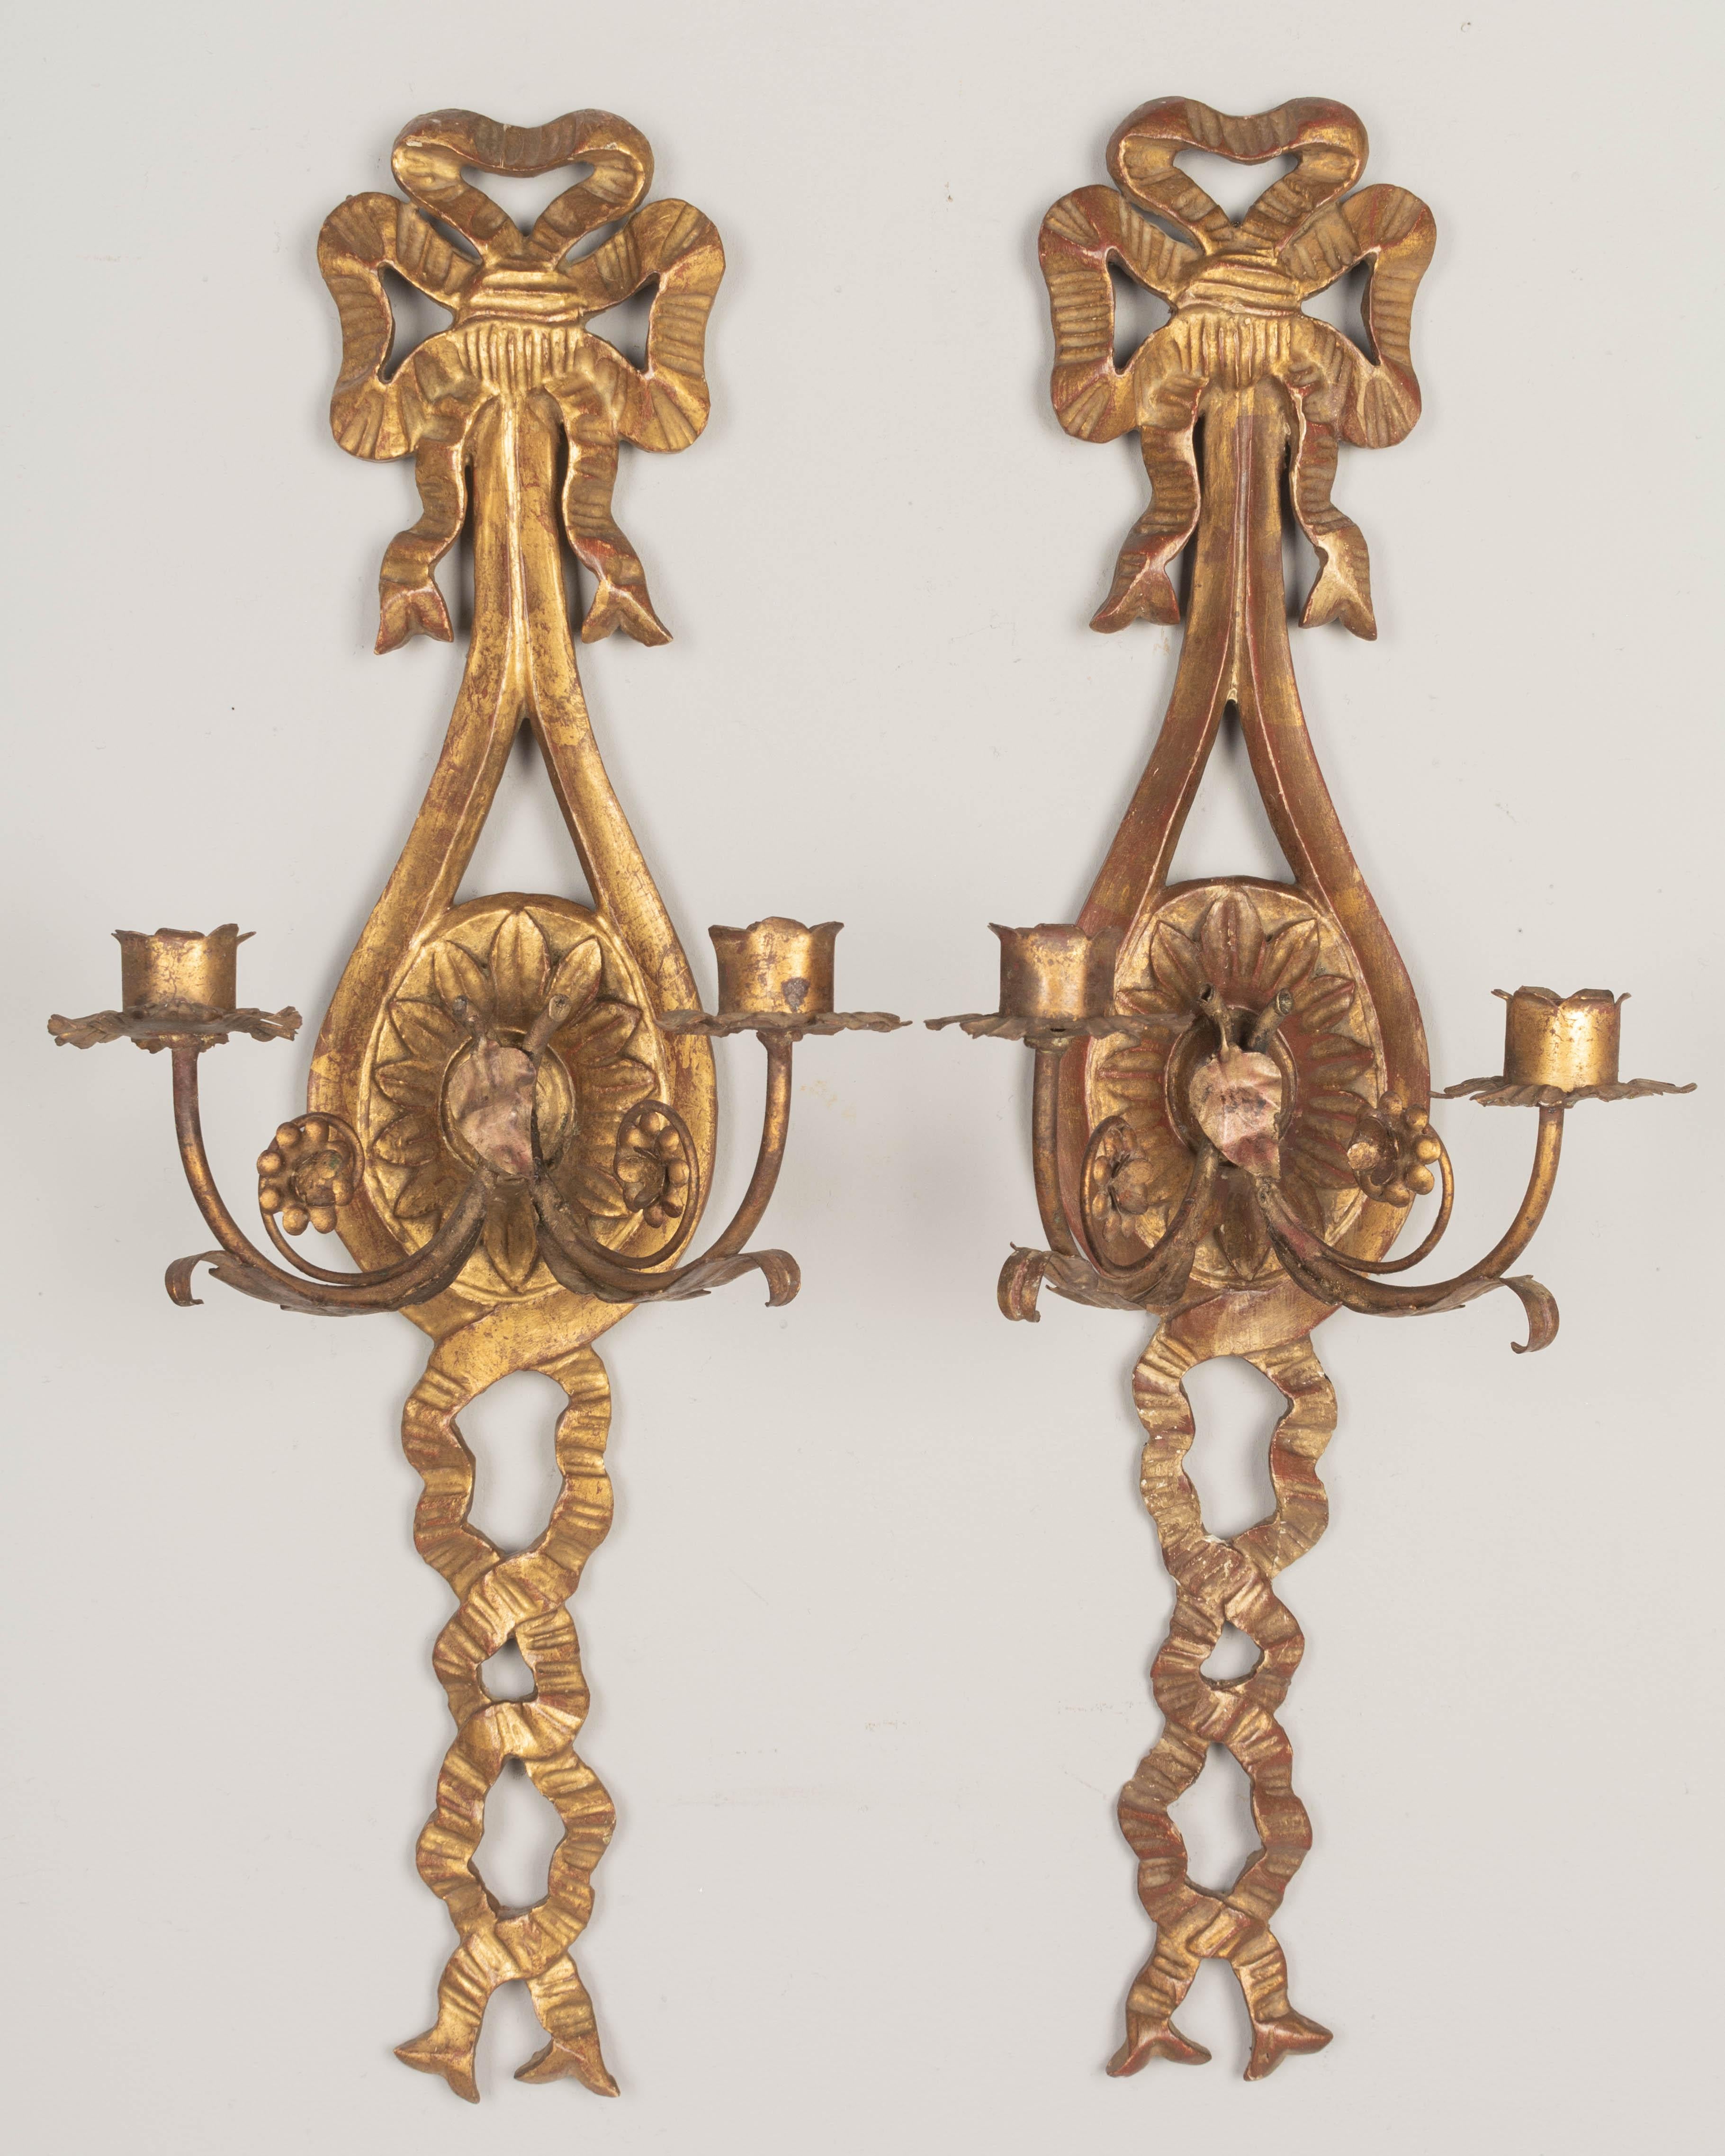 A pair of Italian two-light gilded wood candle sconces, each with carved bow and ribbons. In good condition with warm gilt patina. Two scrolling metal candle arms with tôle details. One arm restored. Not wired, but may be electrified. Circa